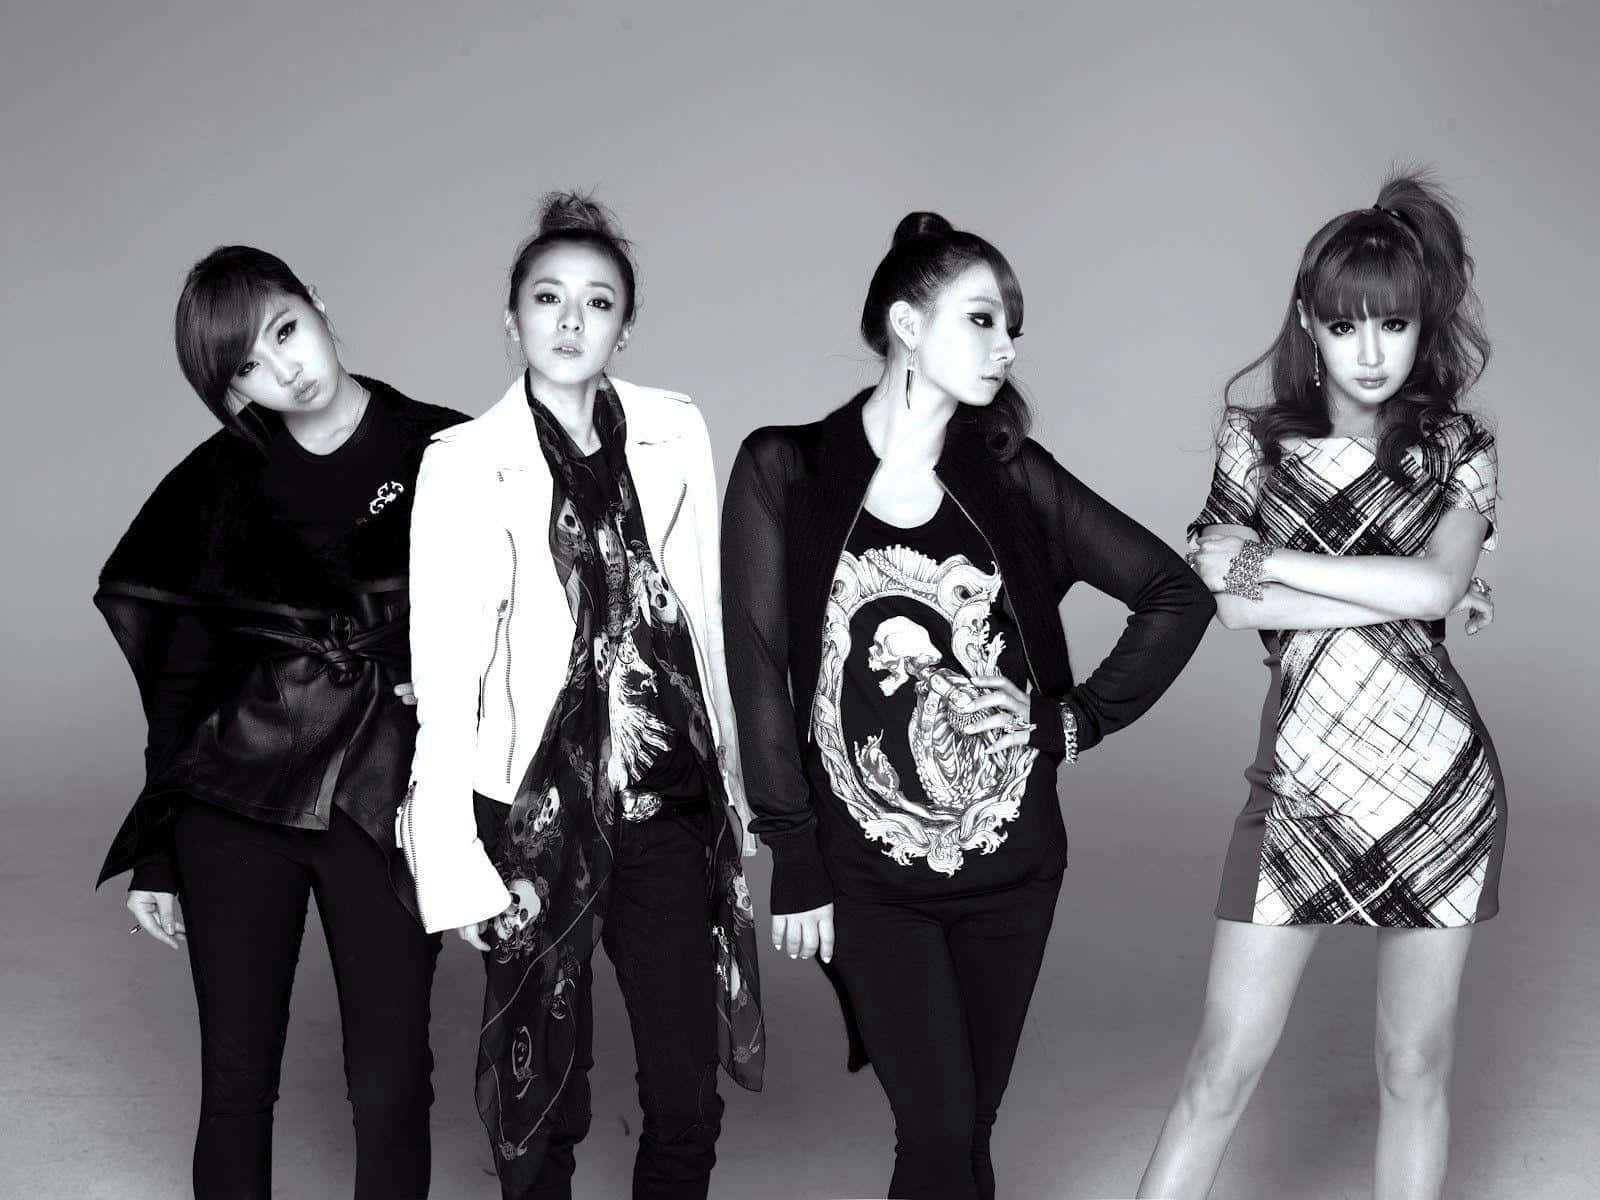 Dara, CL, Bom, and Minzy of 2ne1 Looking for a New Beginning